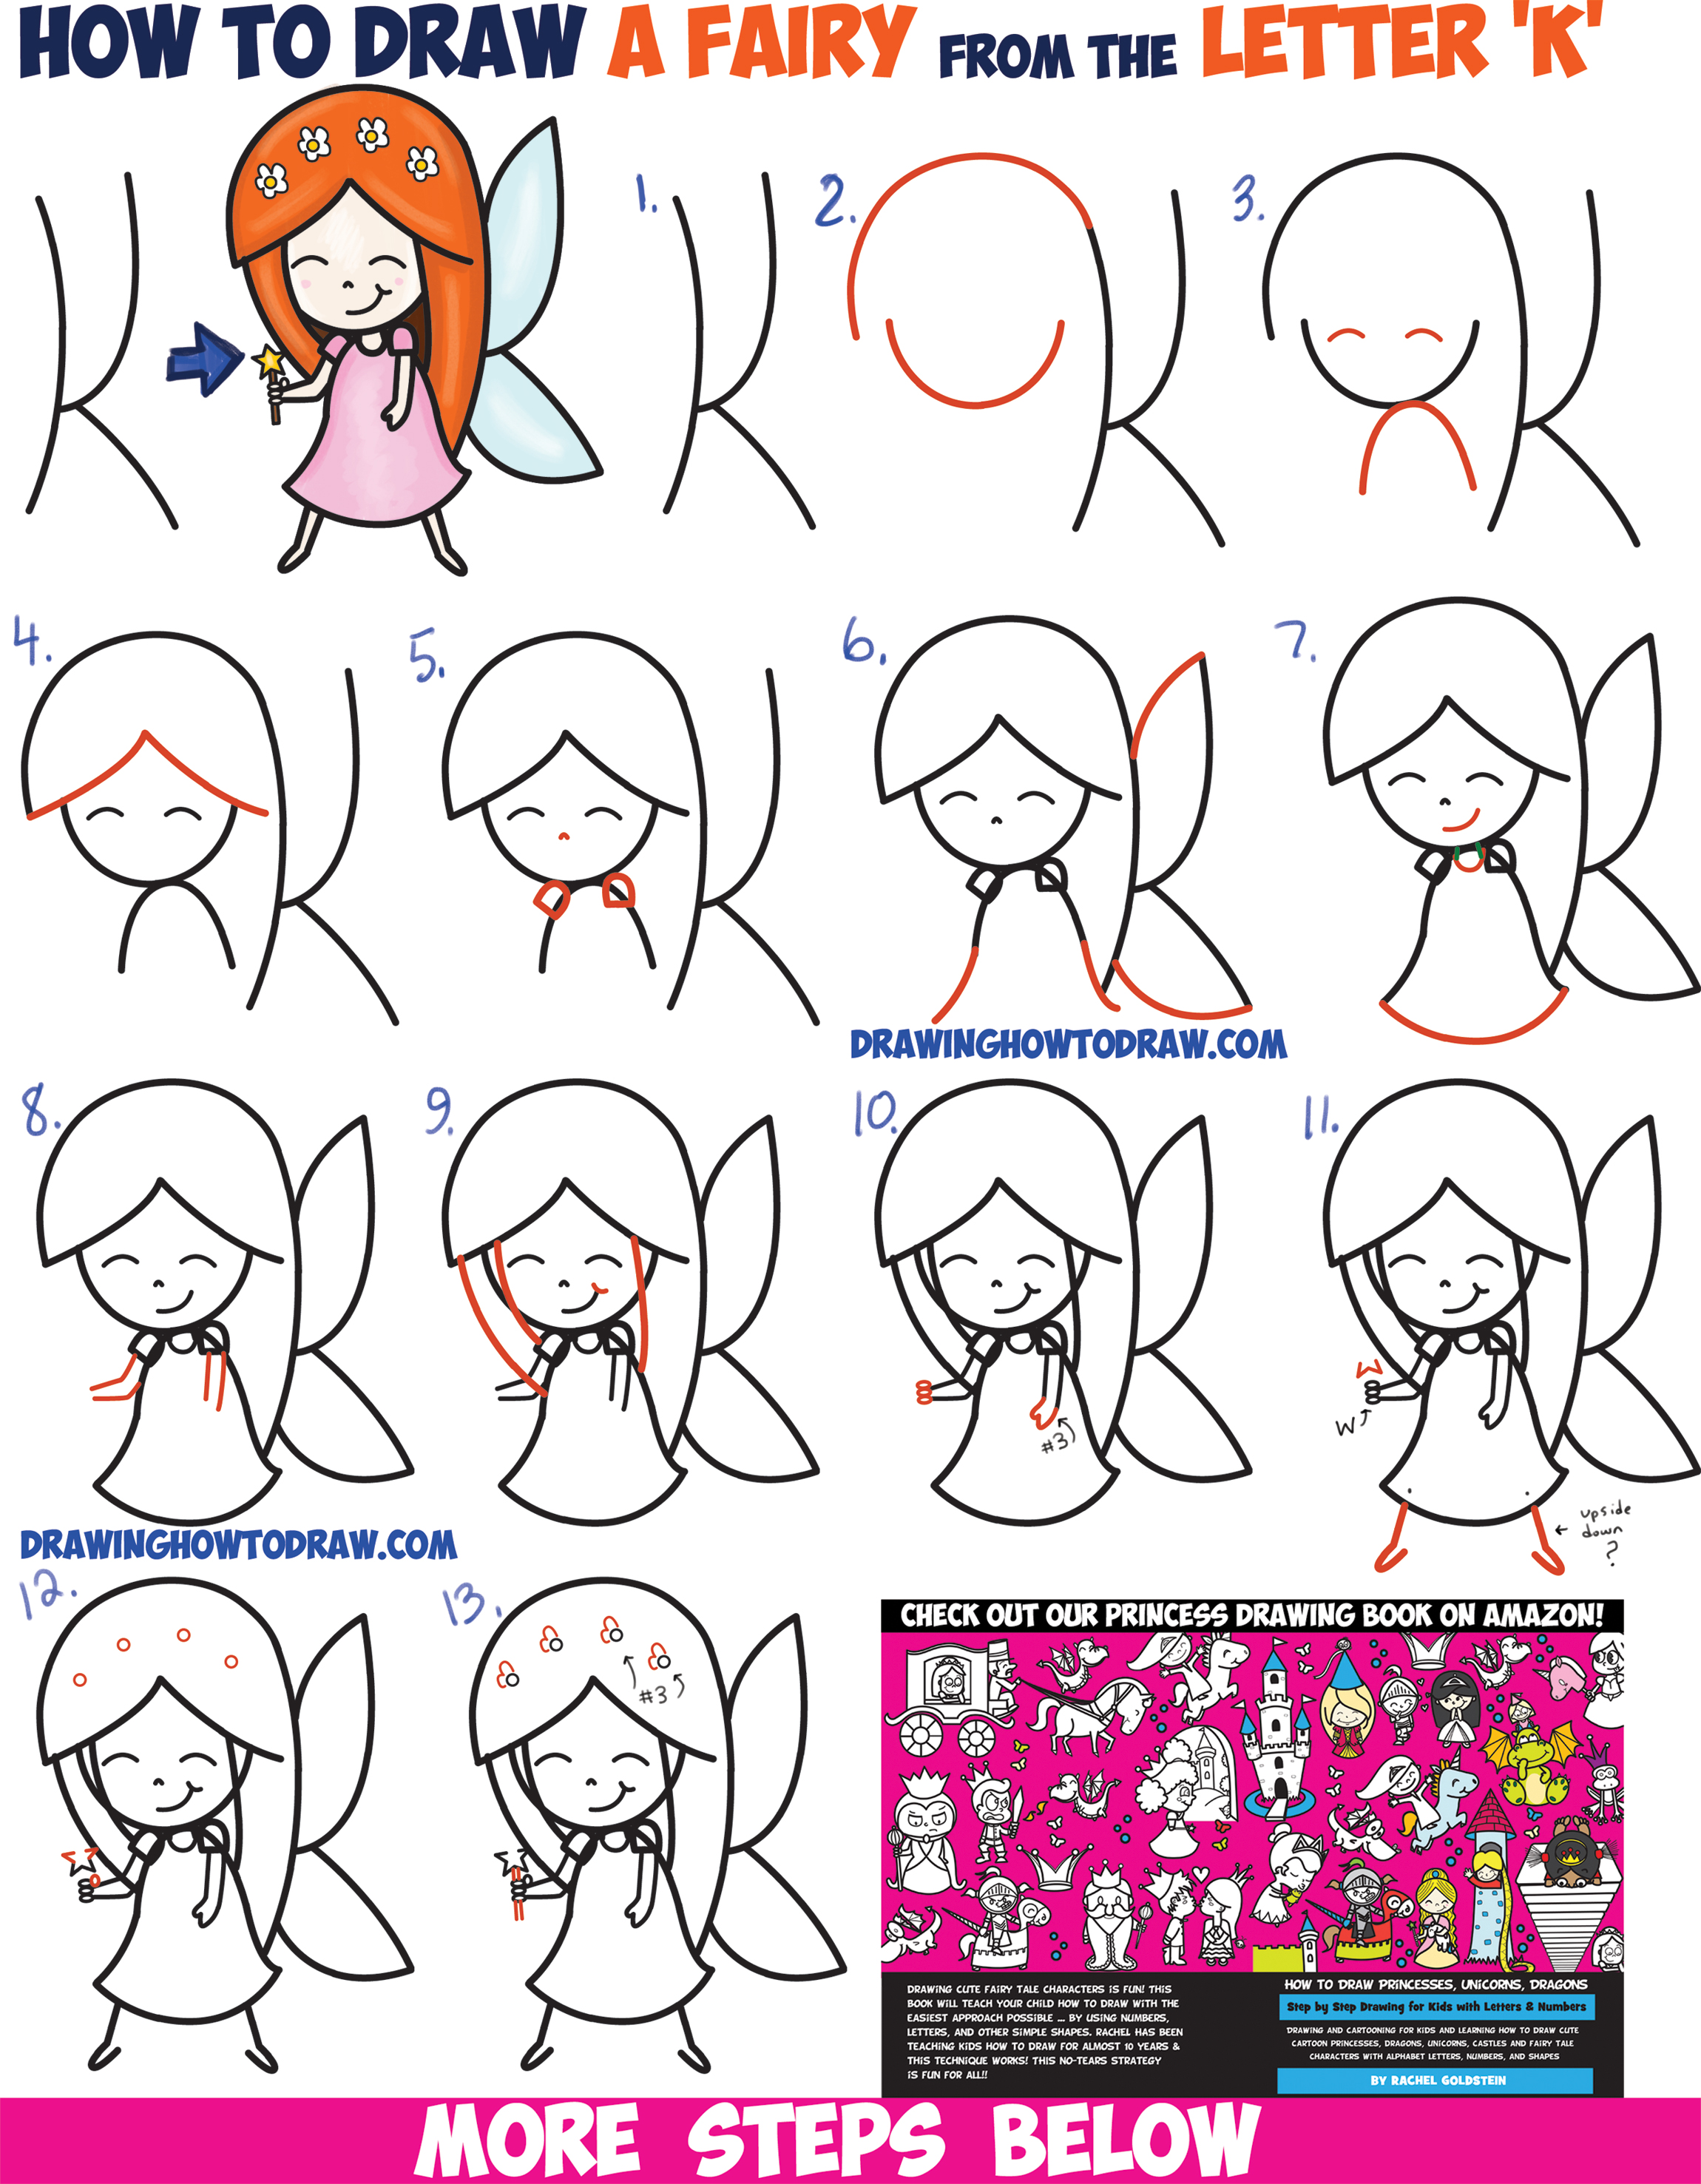 How to Draw a Cute Cartoon Fairy (Kawaii Chibi) from Letter 'K' Easy Step by Step Drawing Tutorial for Kids